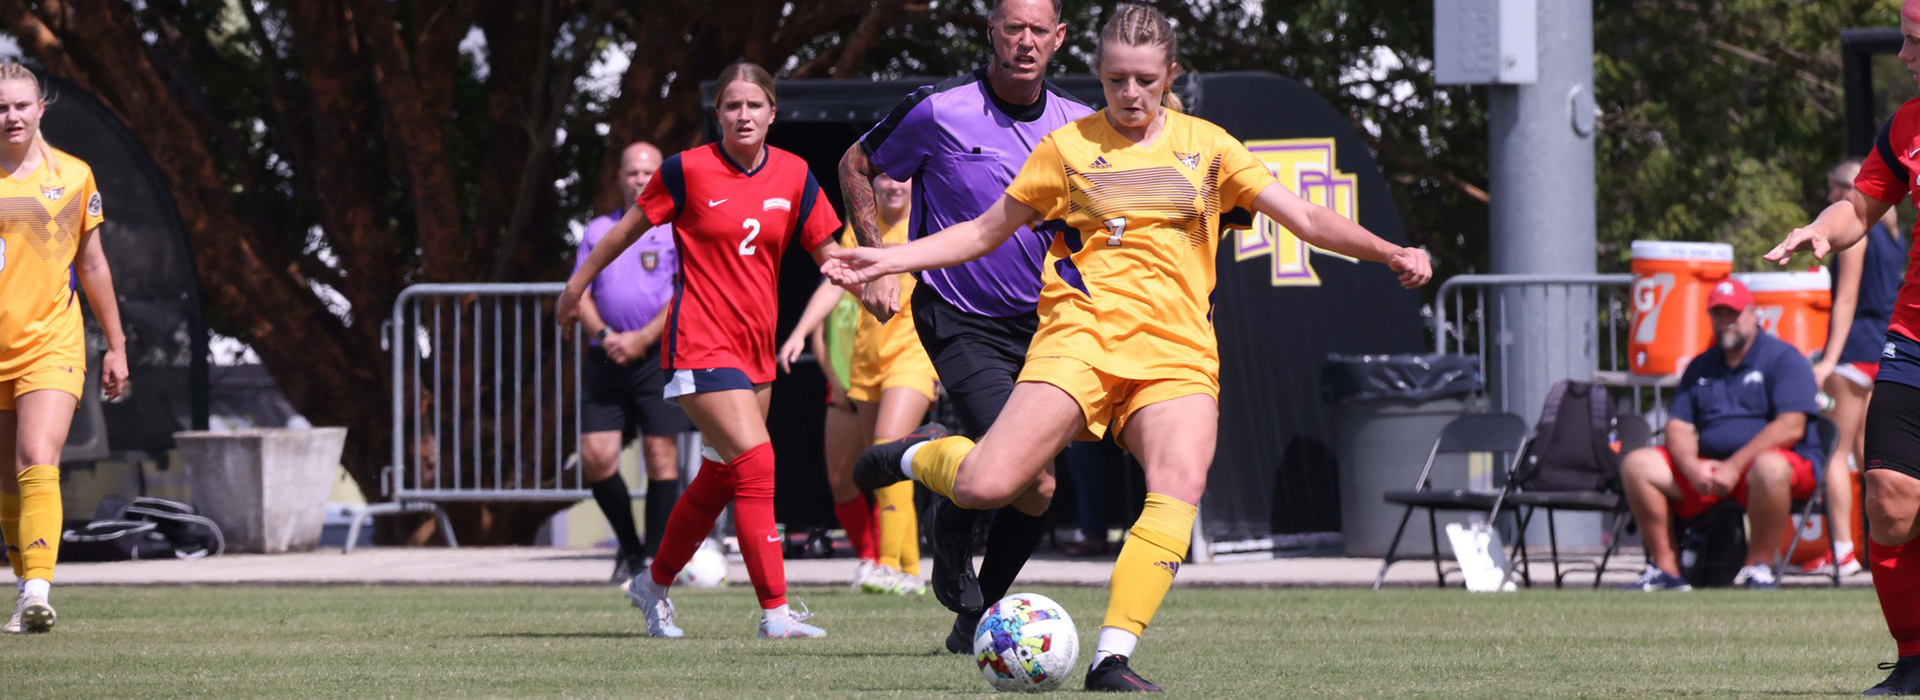 Golden Eagles secure 1-0 win at SEMO to stay unbeaten in OVC play